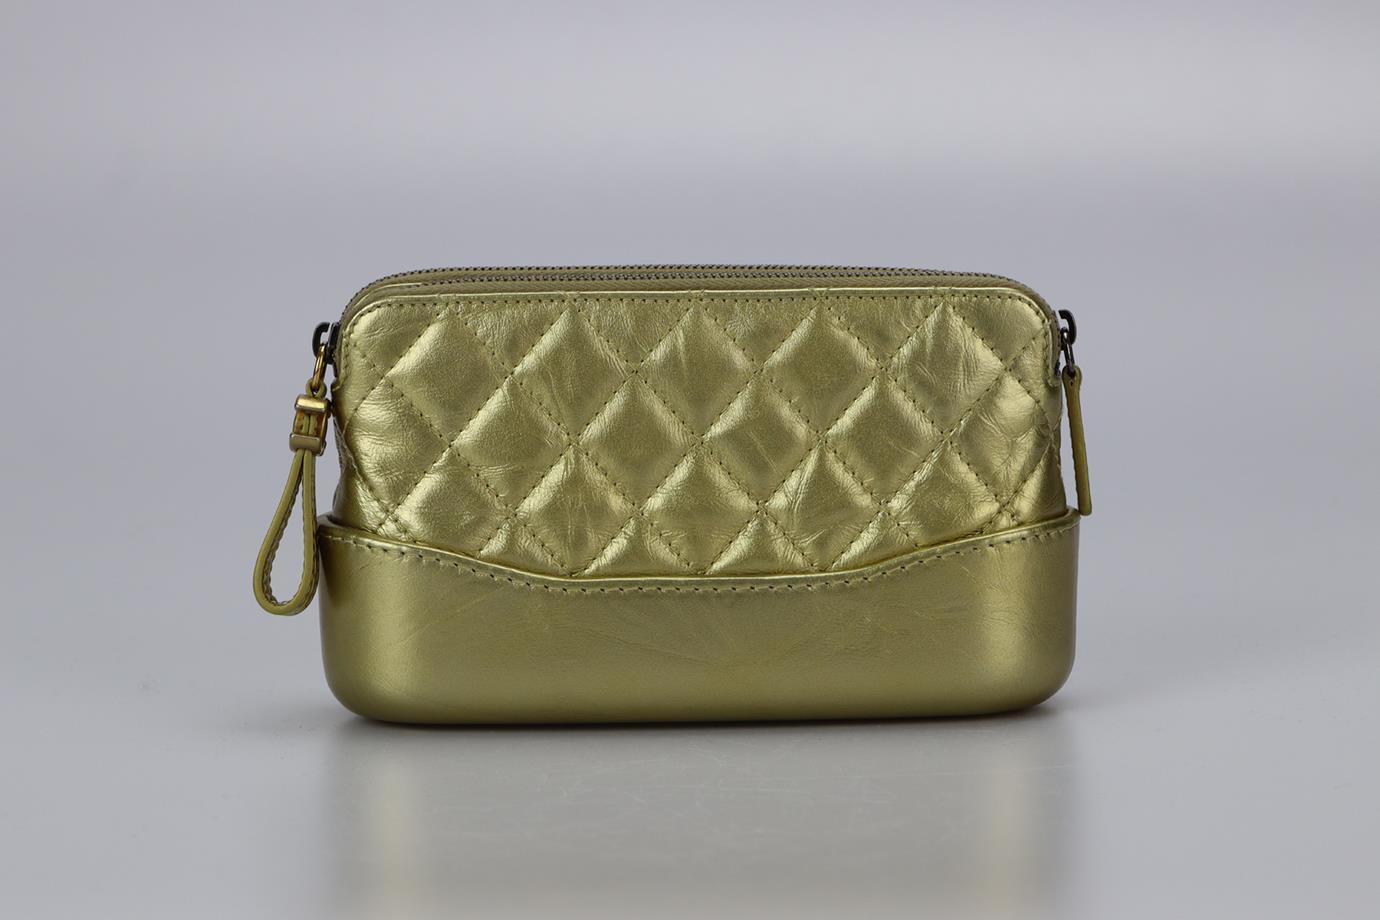 Chanel 2017 Gabrielle Clutch With Chain Quilted Leather Shoulder Bag. Gold. Zip fastening - Top. Comes with - authenticity card. Does not come with - dustbag or box. Height: 4.1 in. Width: 6.8 in. Depth: 1.8 in. Handle drop: 17.5 in. Strap drop: 32